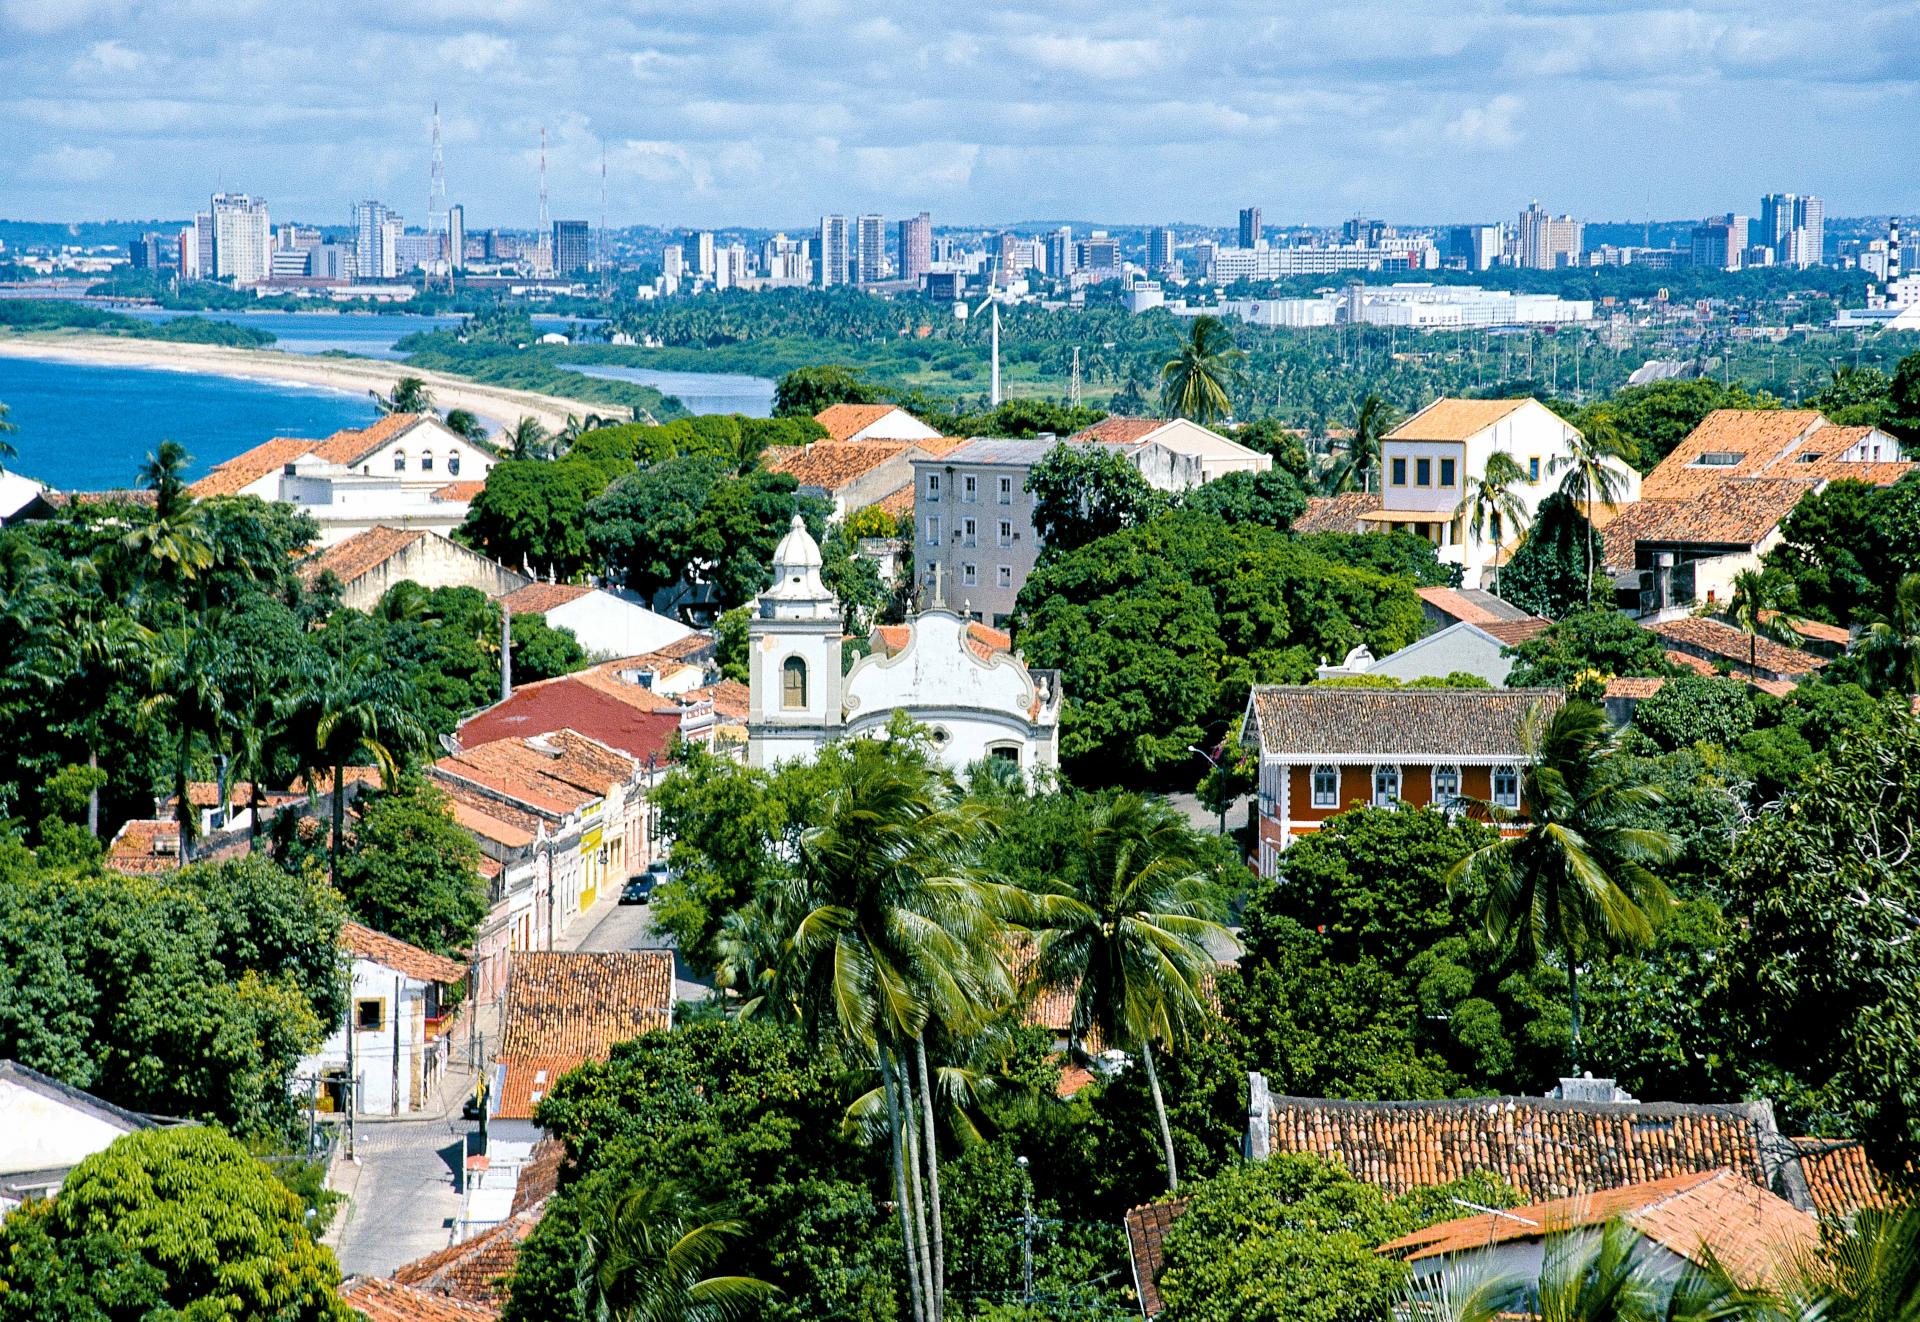 This Brazilian city is called Capital Of Happiness! You will also appreciate seeing the beauty